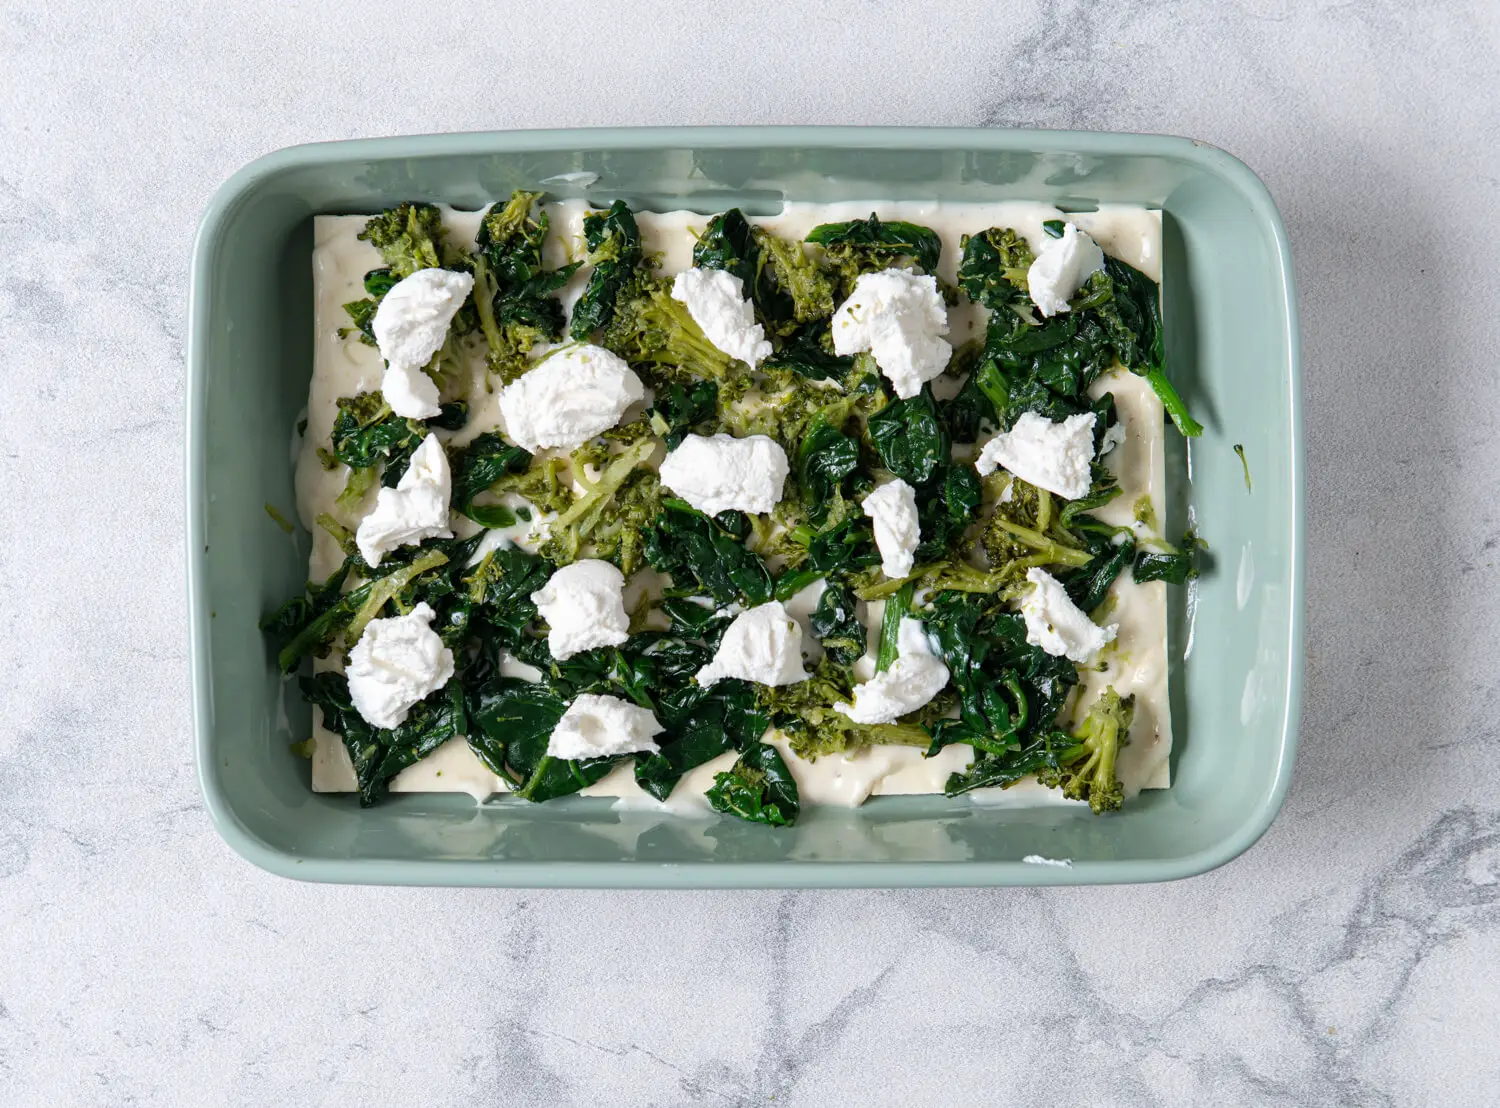 Bechamel sauce, spinach-broccoli mixture, ricotta, and mozzarella go on top of the noodles.